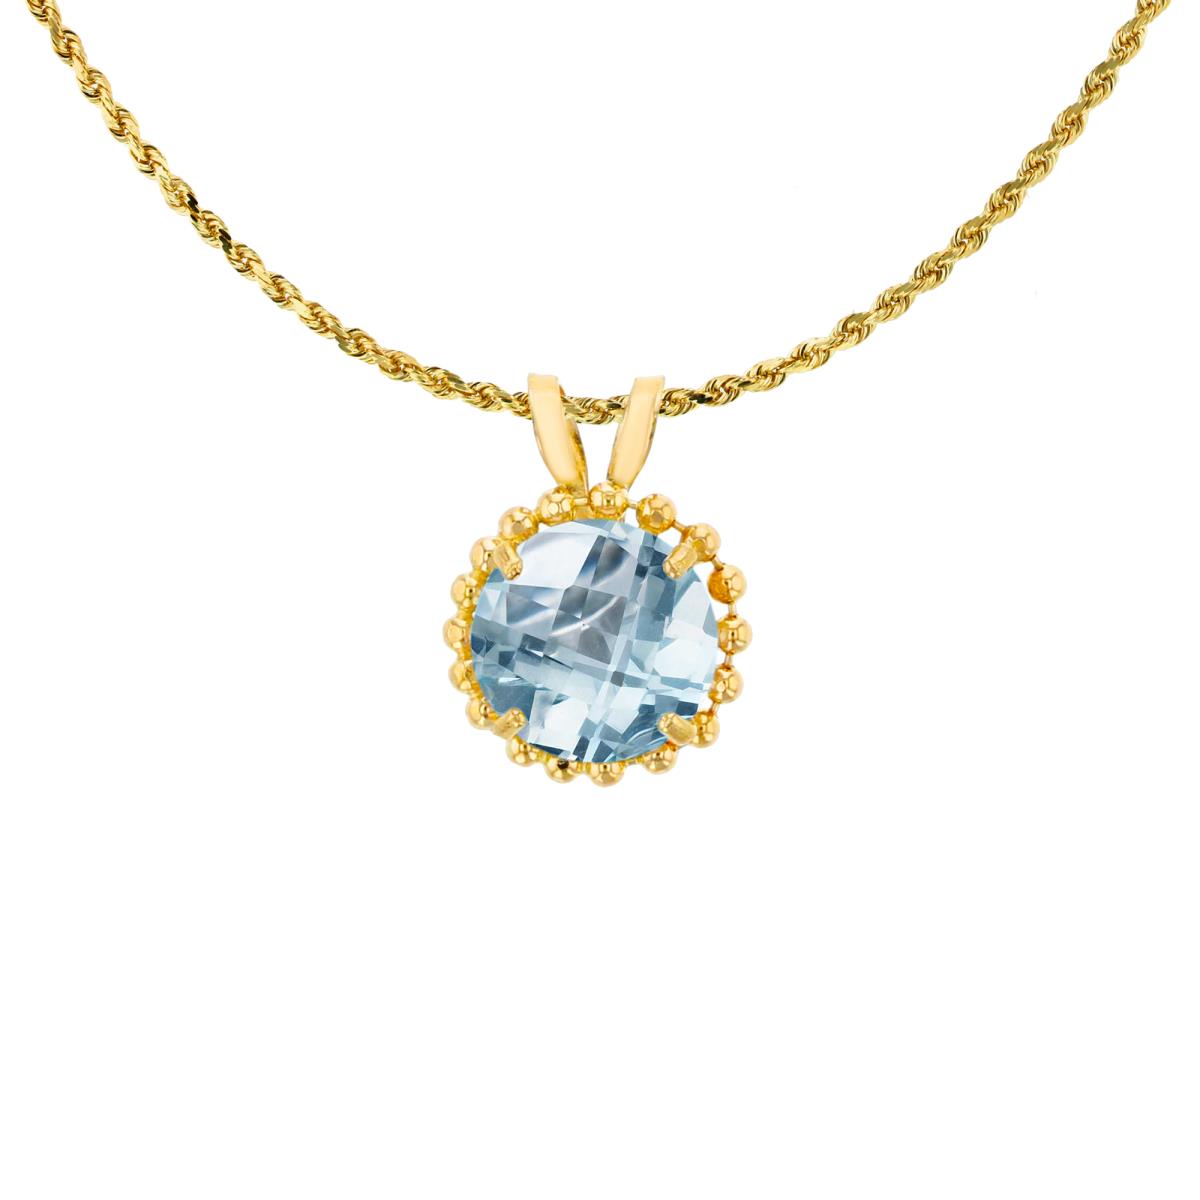 10K Yellow Gold 6mm Rd Cut Aquamarine with Bead Frame Rabbit Ear 18" Necklace